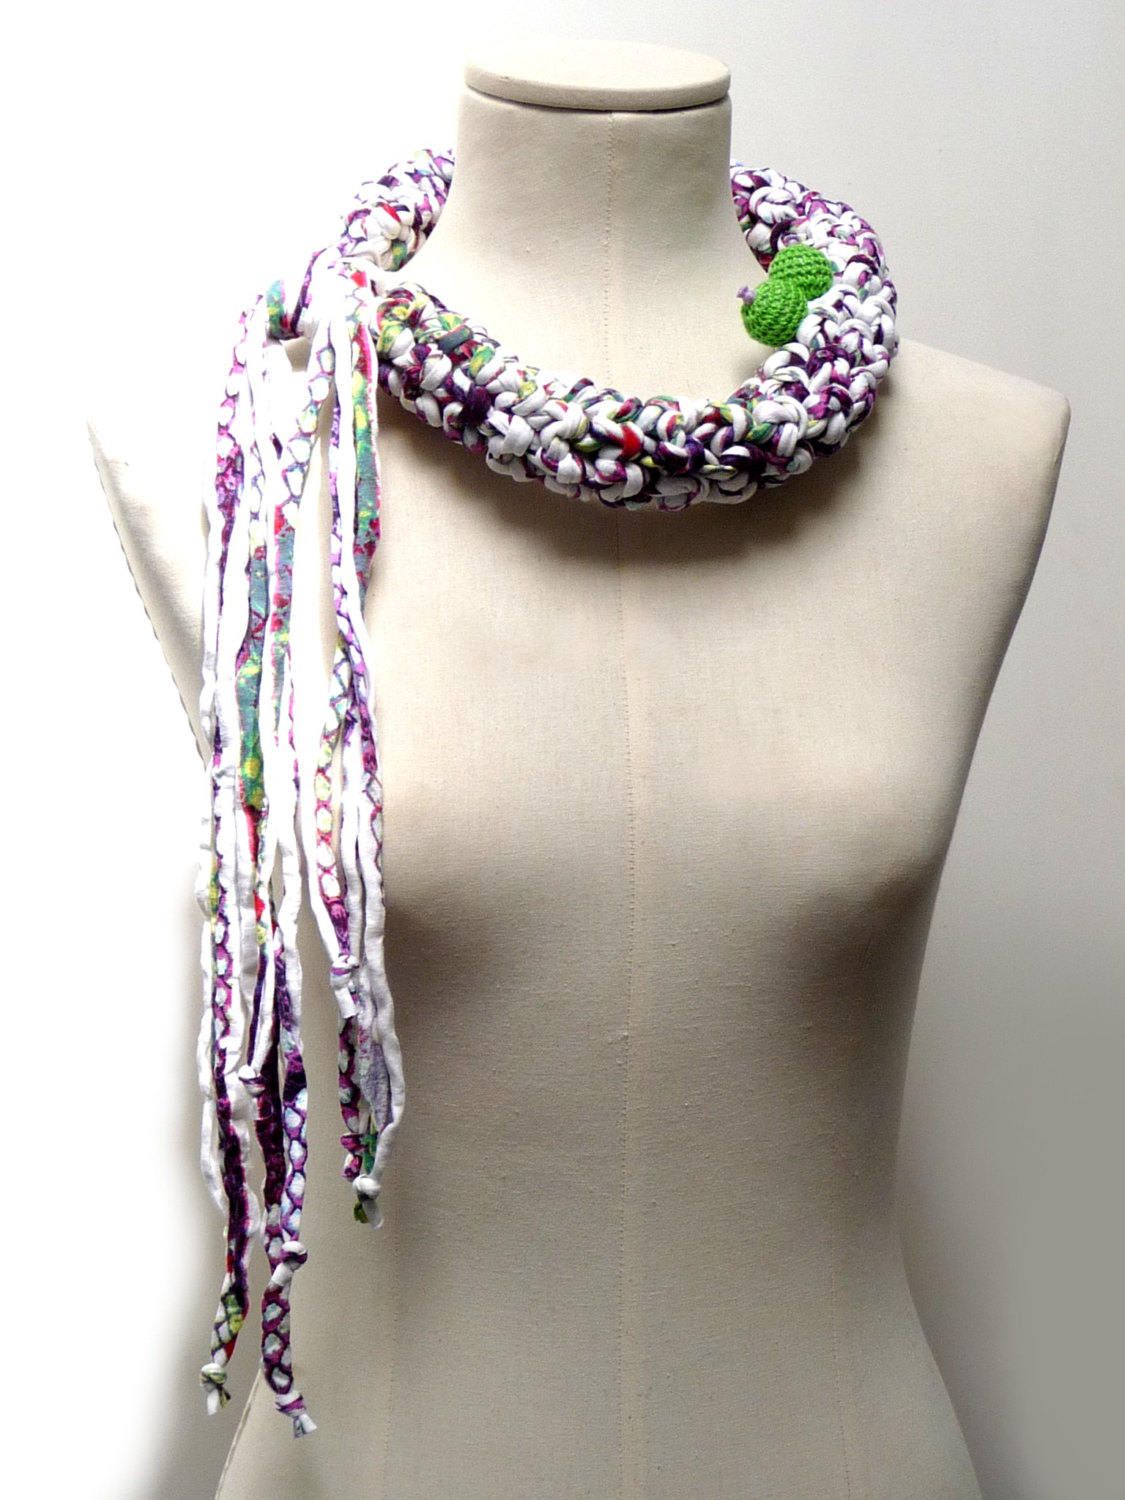 Crochet Statement Necklace - White Purple Lime Green Upcycled Jersey Yarn - Jersey Scarf Cowl - Crochet Jewelry - Textile Necklace